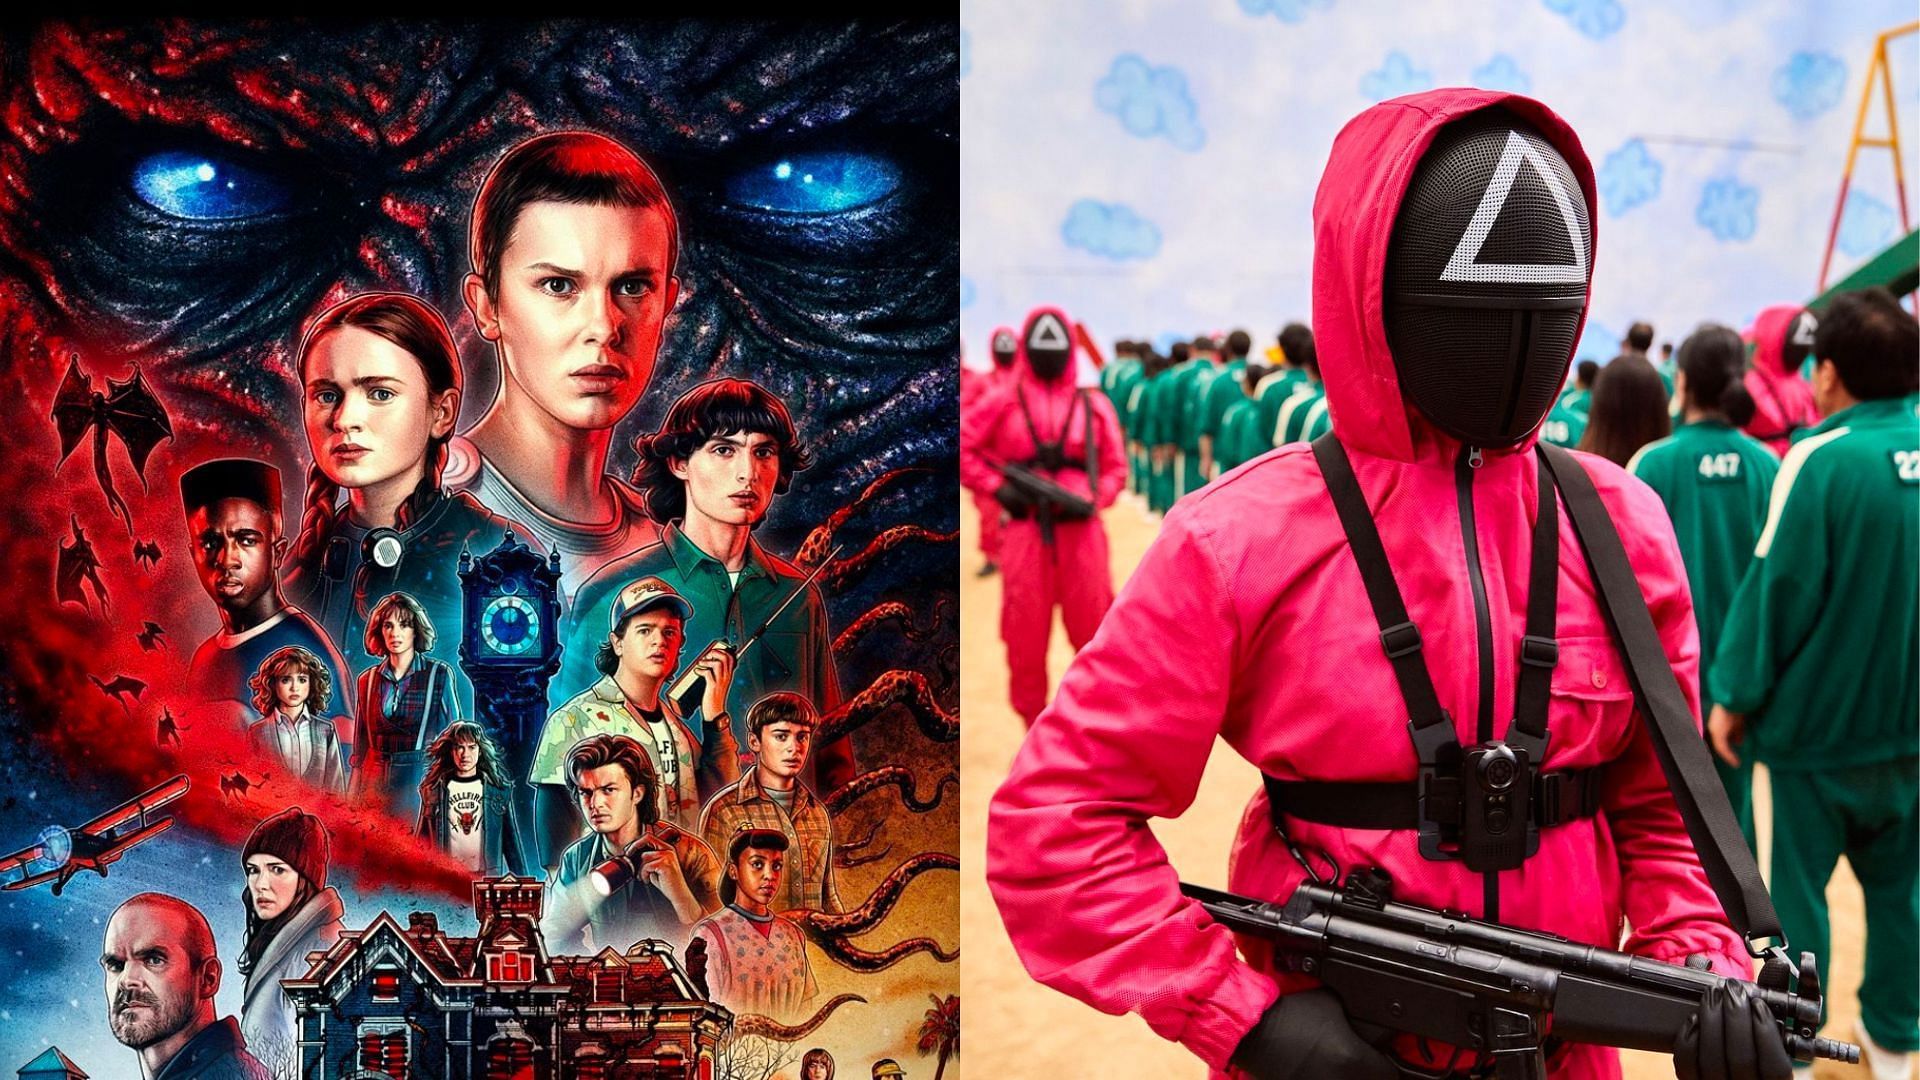 Prepare yourself for updates on Stranger Things (L) and Squid Game (R) during Netflix Geeked Week (Image via Netflix)